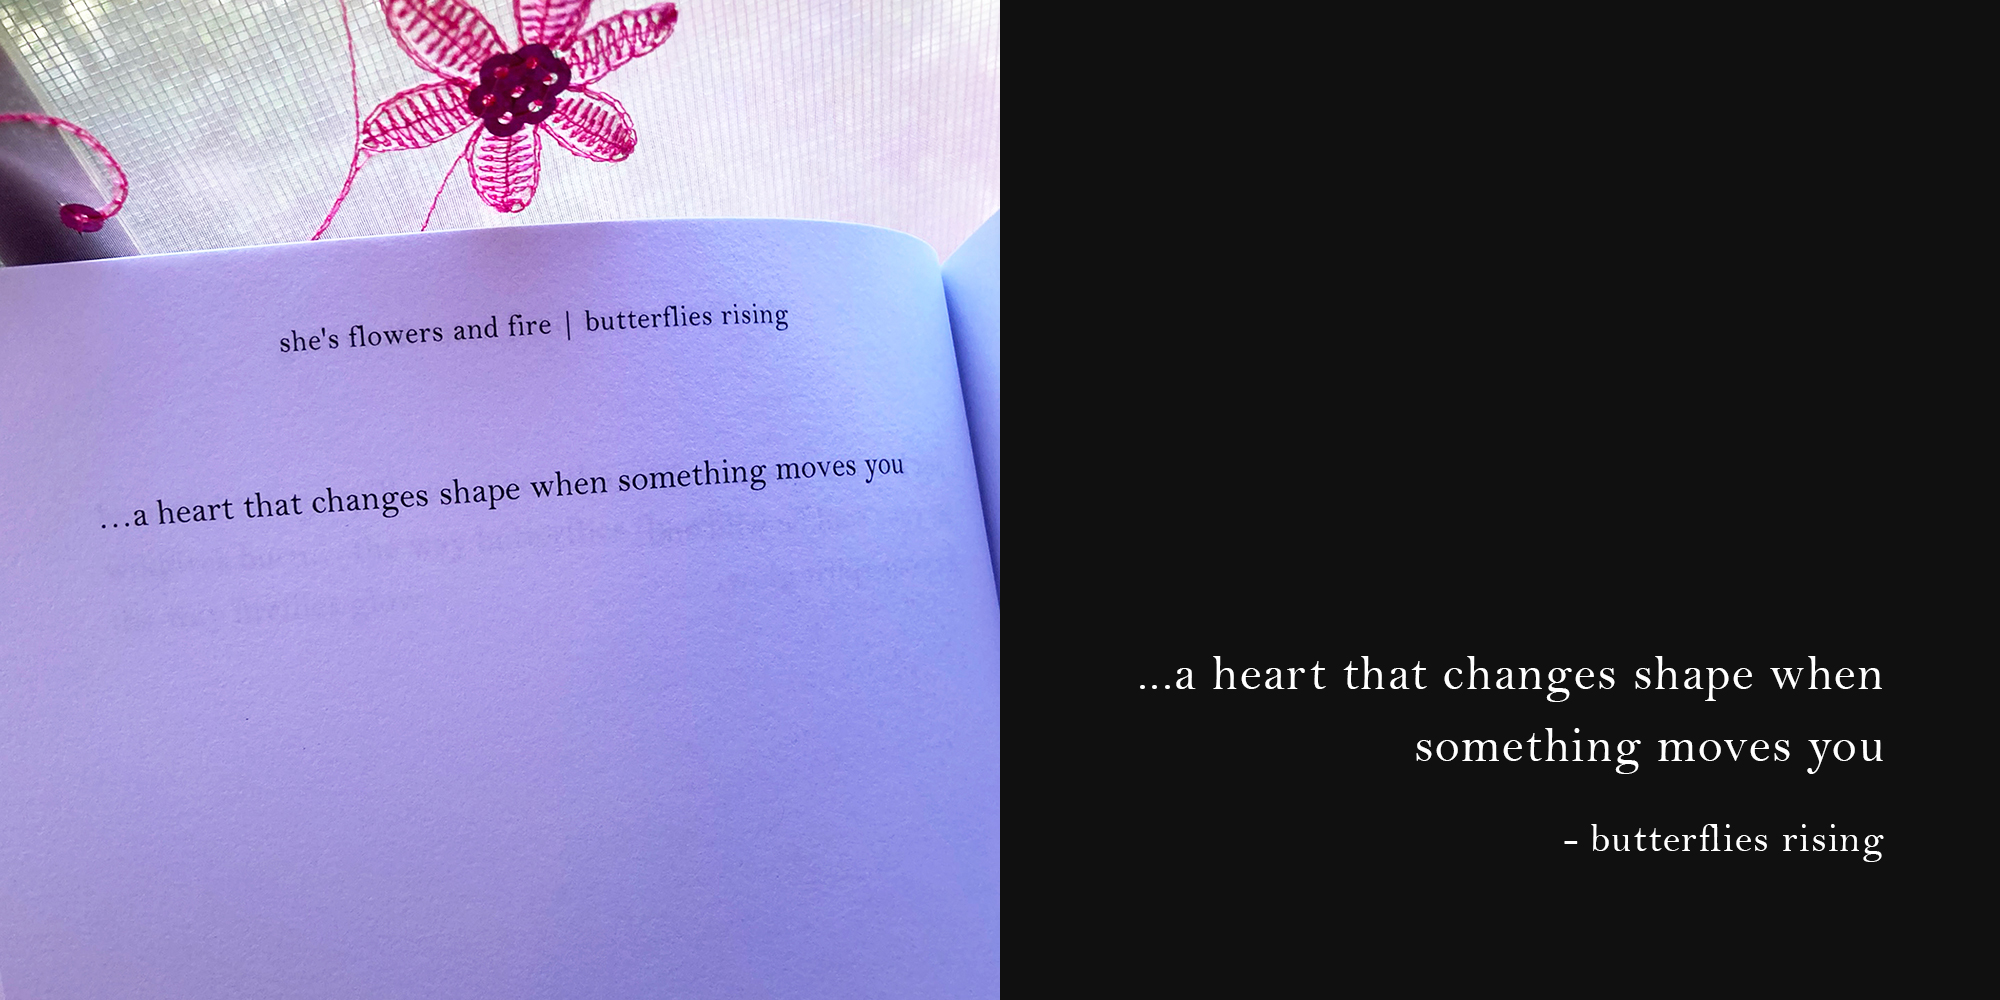 ...a heart that changes shape when something moves you - butterflies rising